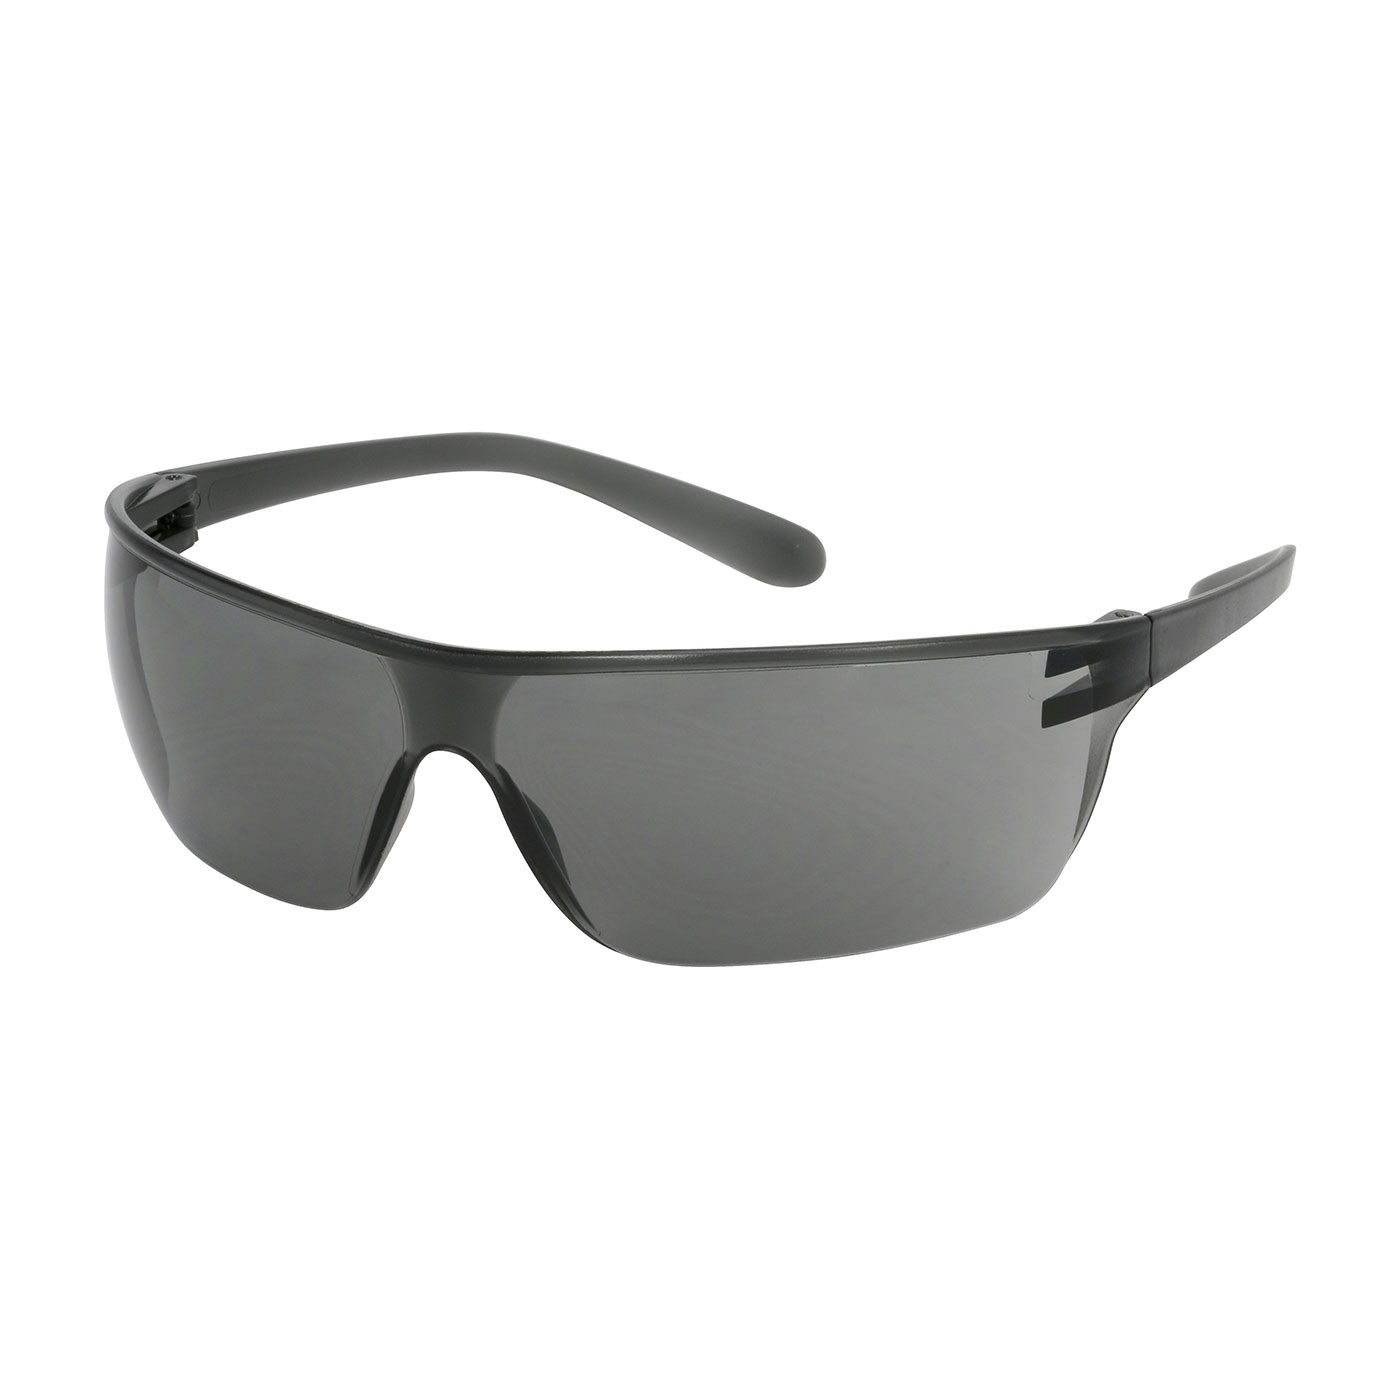 Zenon Z-Lyte II™ Rimless Safety Glasses with Gray Temple, Gray Lens and Anti-Scratch Coating  (#250-13-0001)